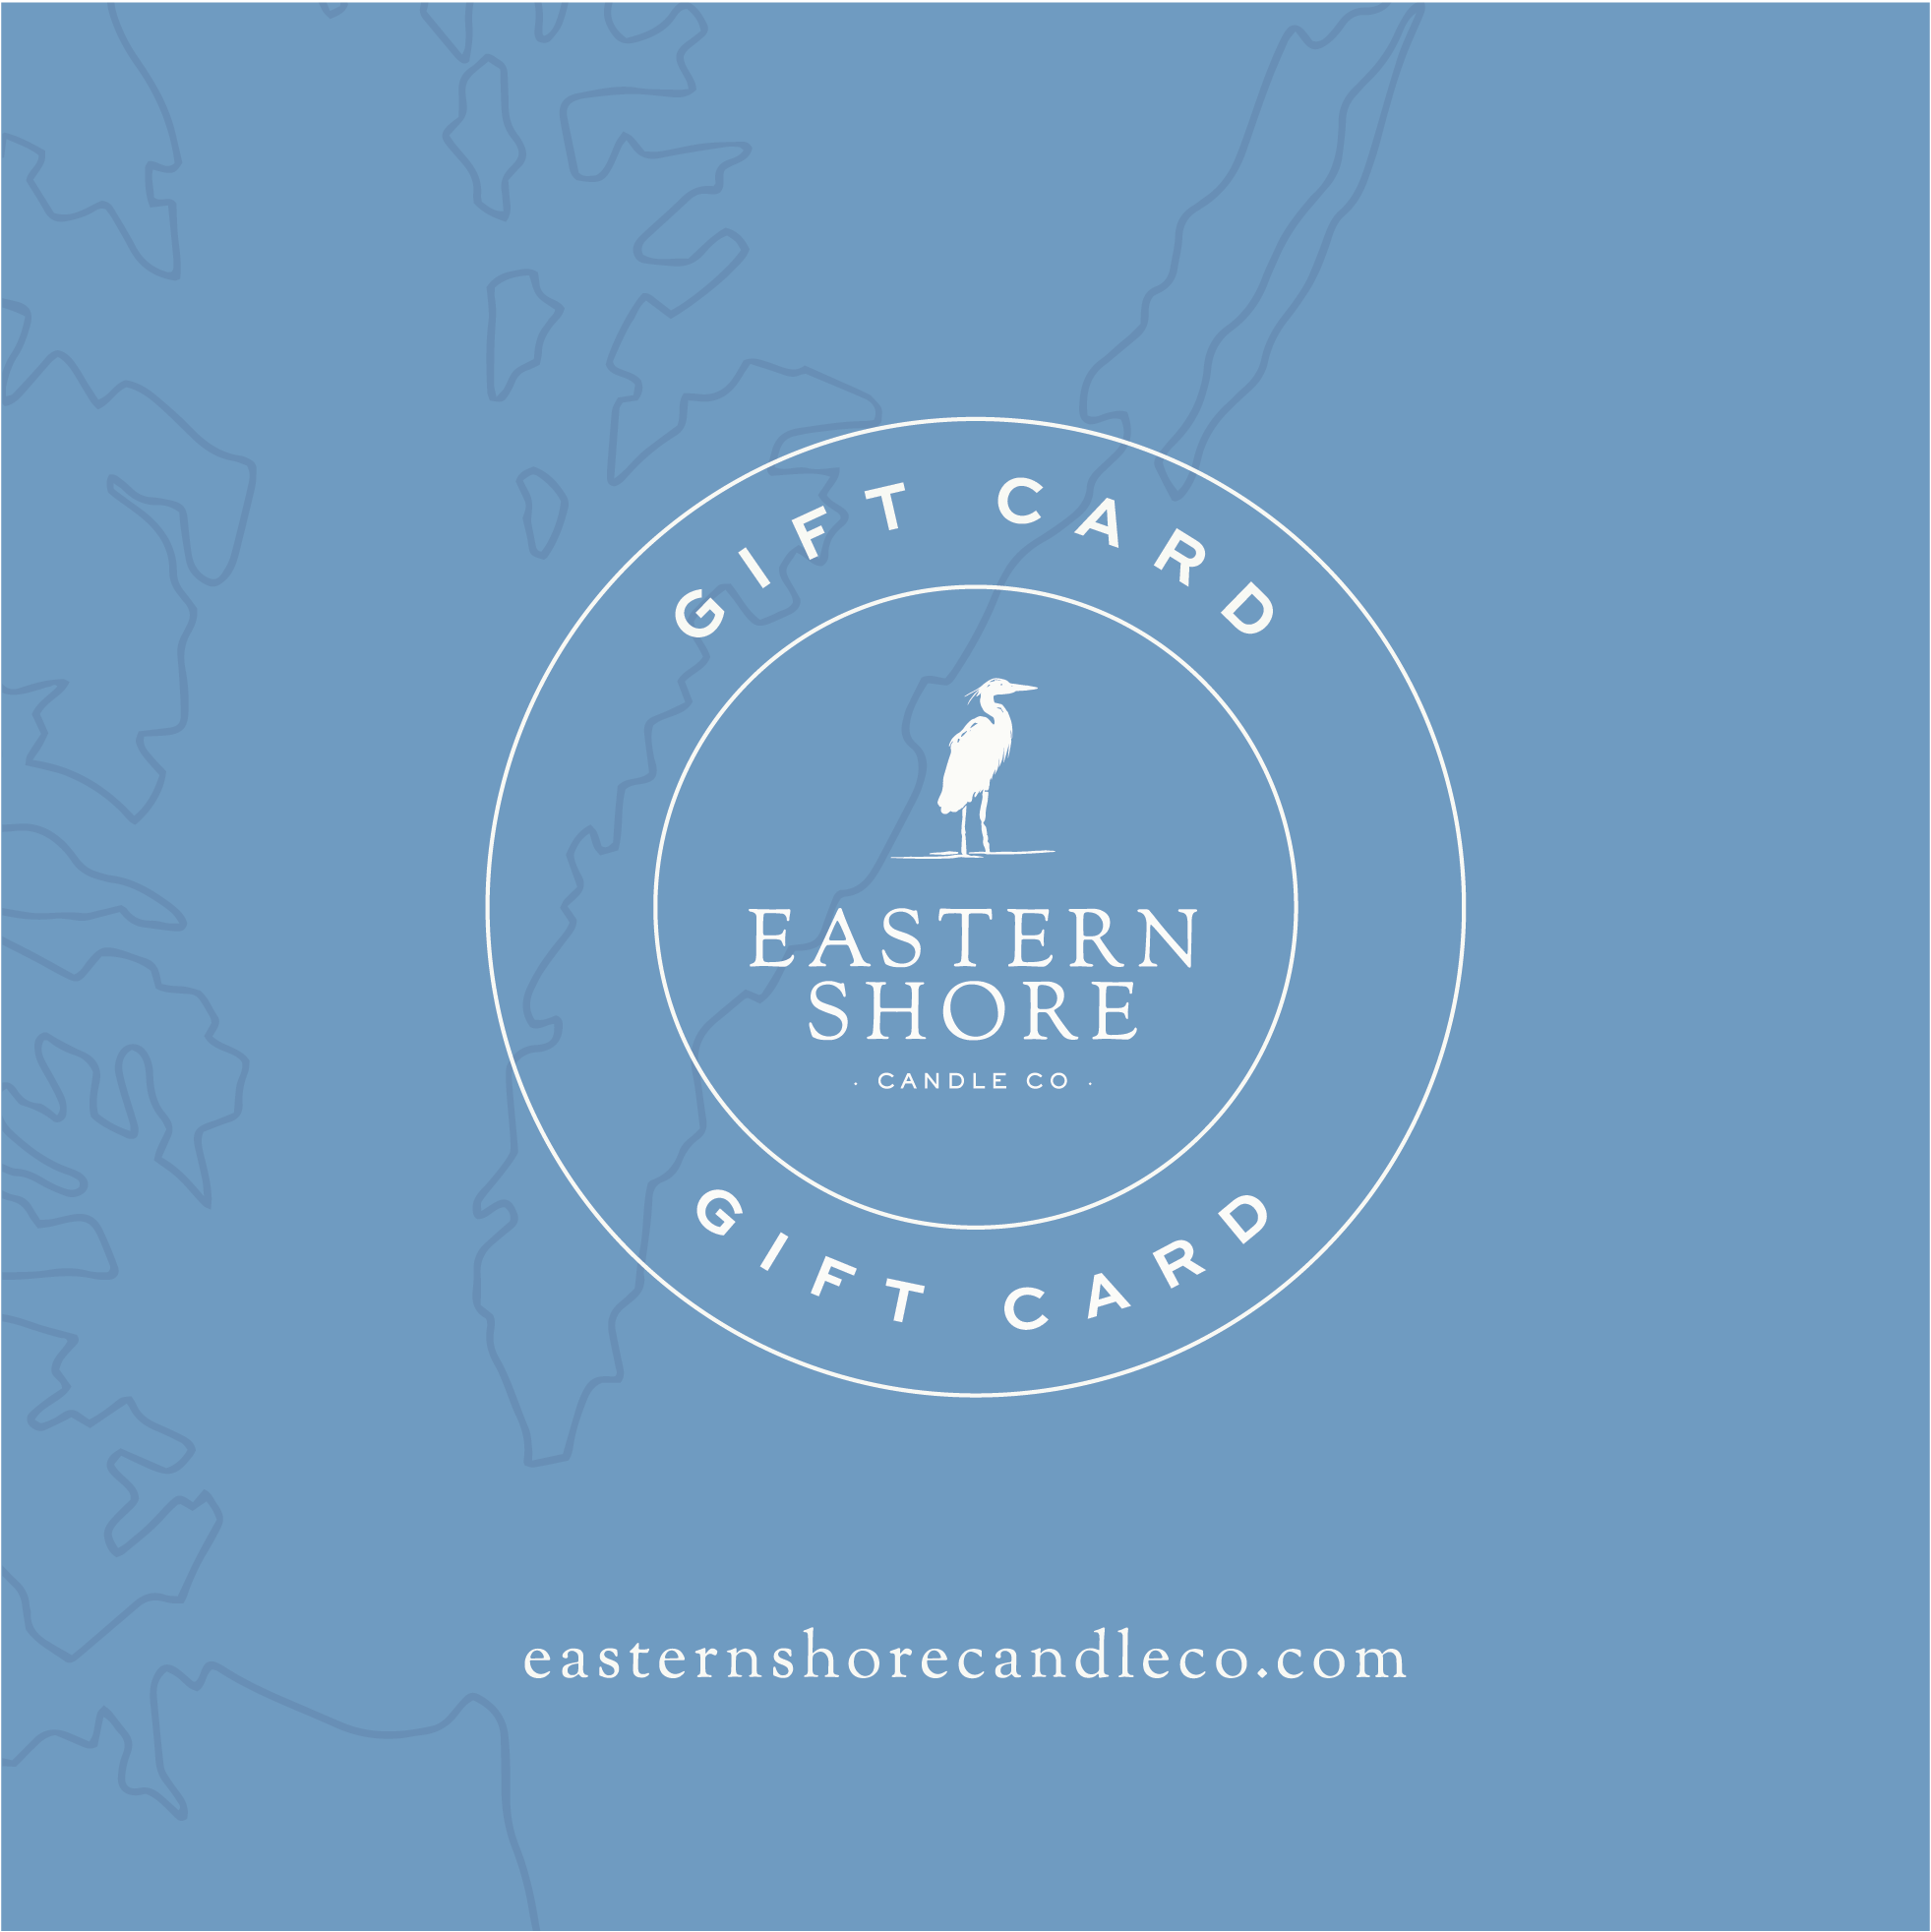 Digital gift cards, gift cards for him, gift cards for her, scented candle gifts, luxury candles, handmade candles, hand poured candles, gift cards, easter shore, maryland, cambridge, easton, virginia, annapolis